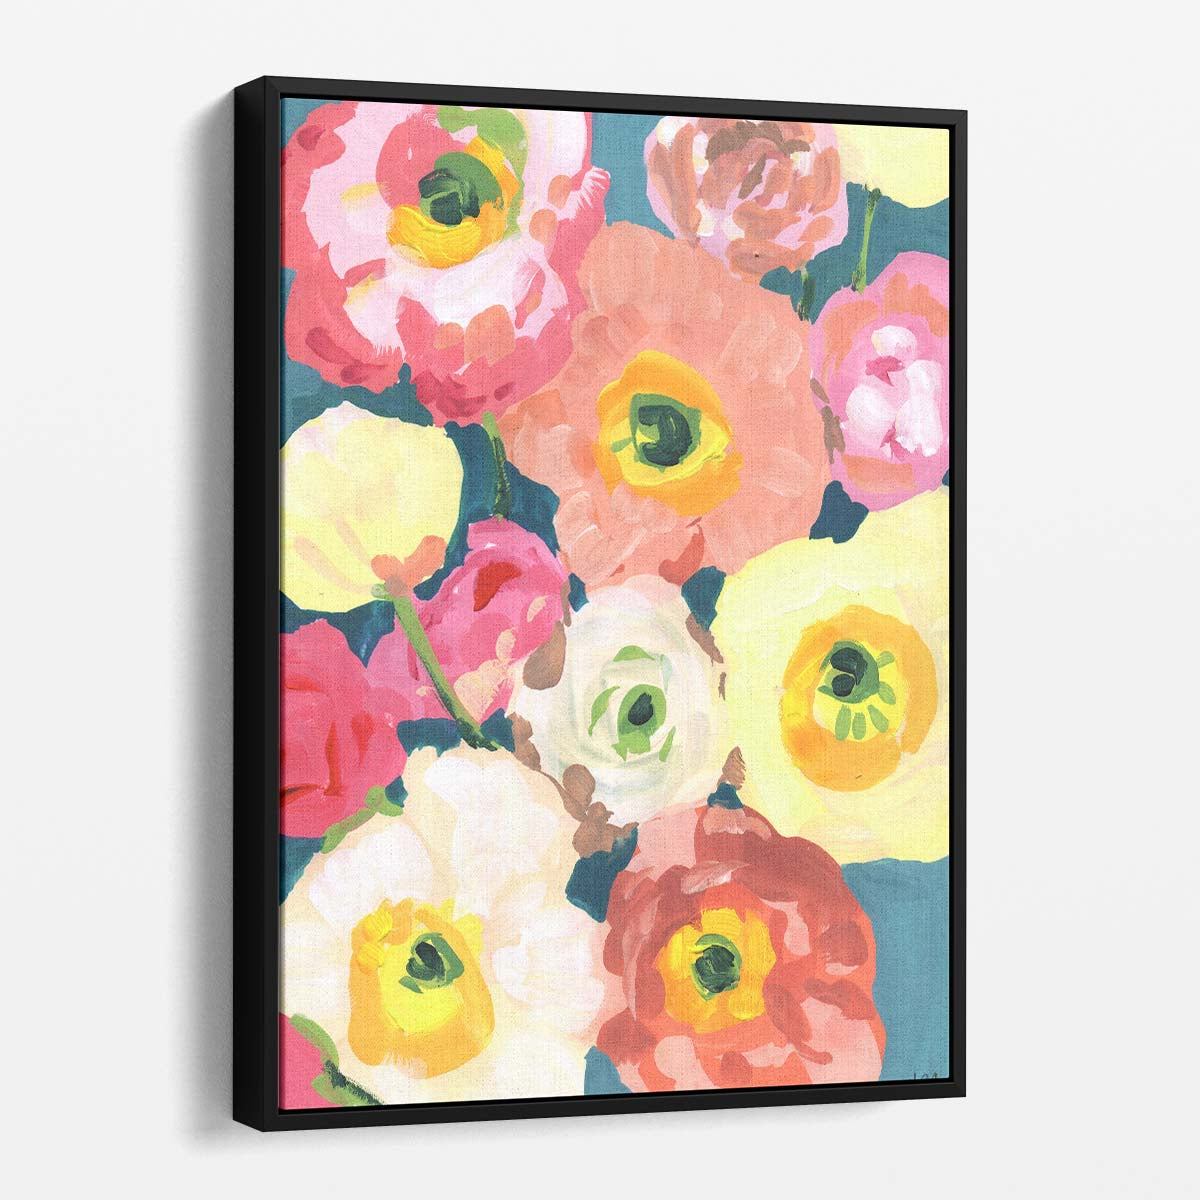 Colorful Botanical Icelandic Poppies Illustration; Bold Floral Artwork by Luxuriance Designs, made in USA